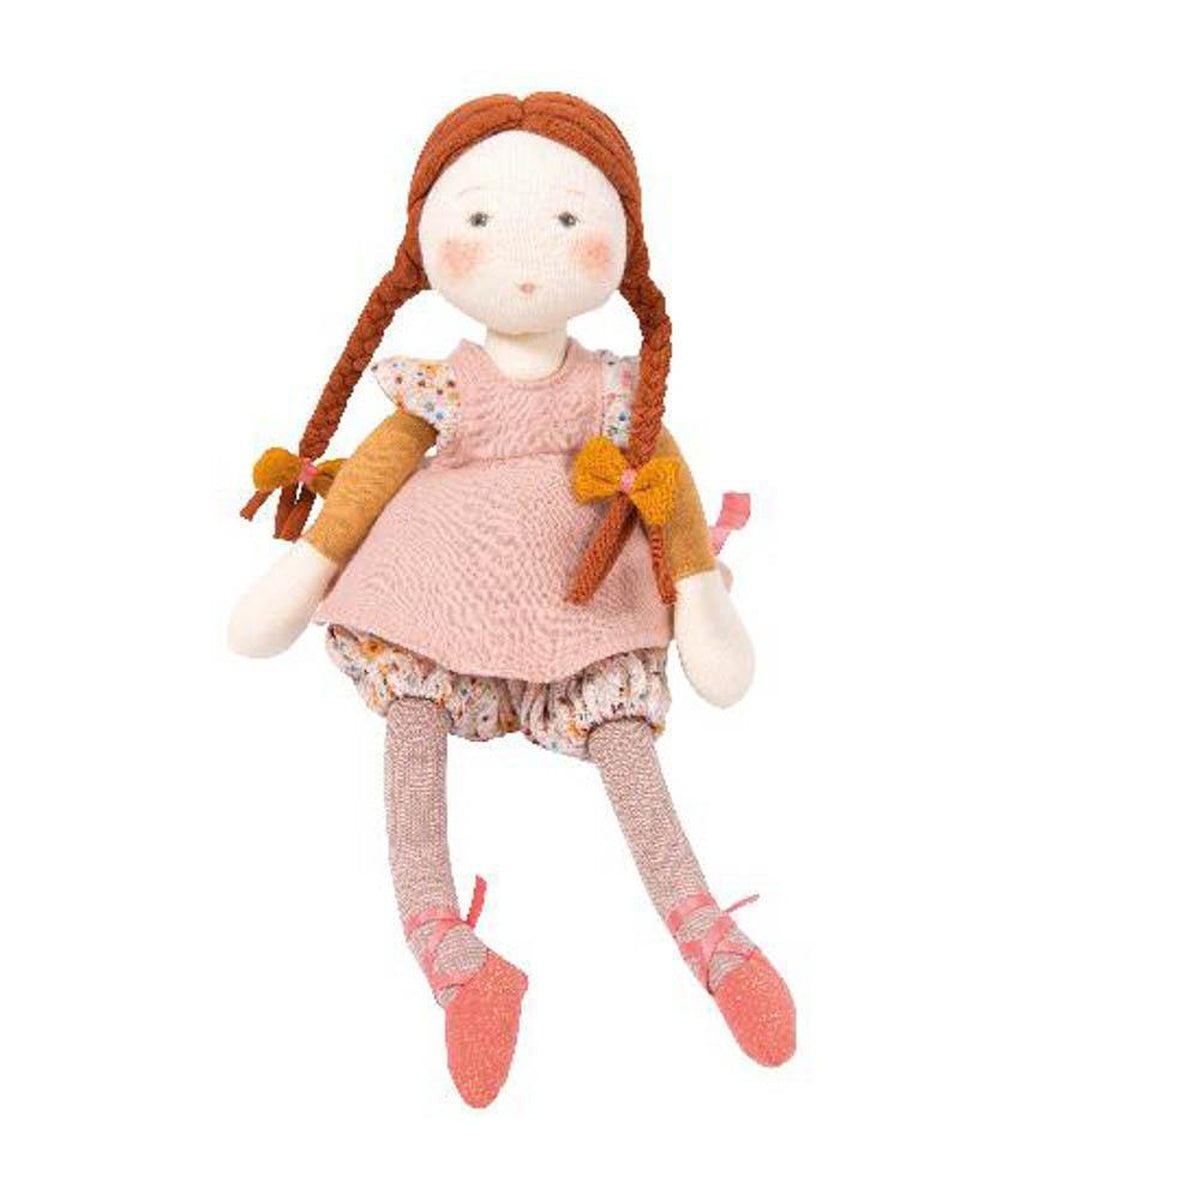 Moulin Roty les rosalies Fleur rag doll-puppets, stuffies & dolls-Fire the Imagination-Dilly Dally Kids